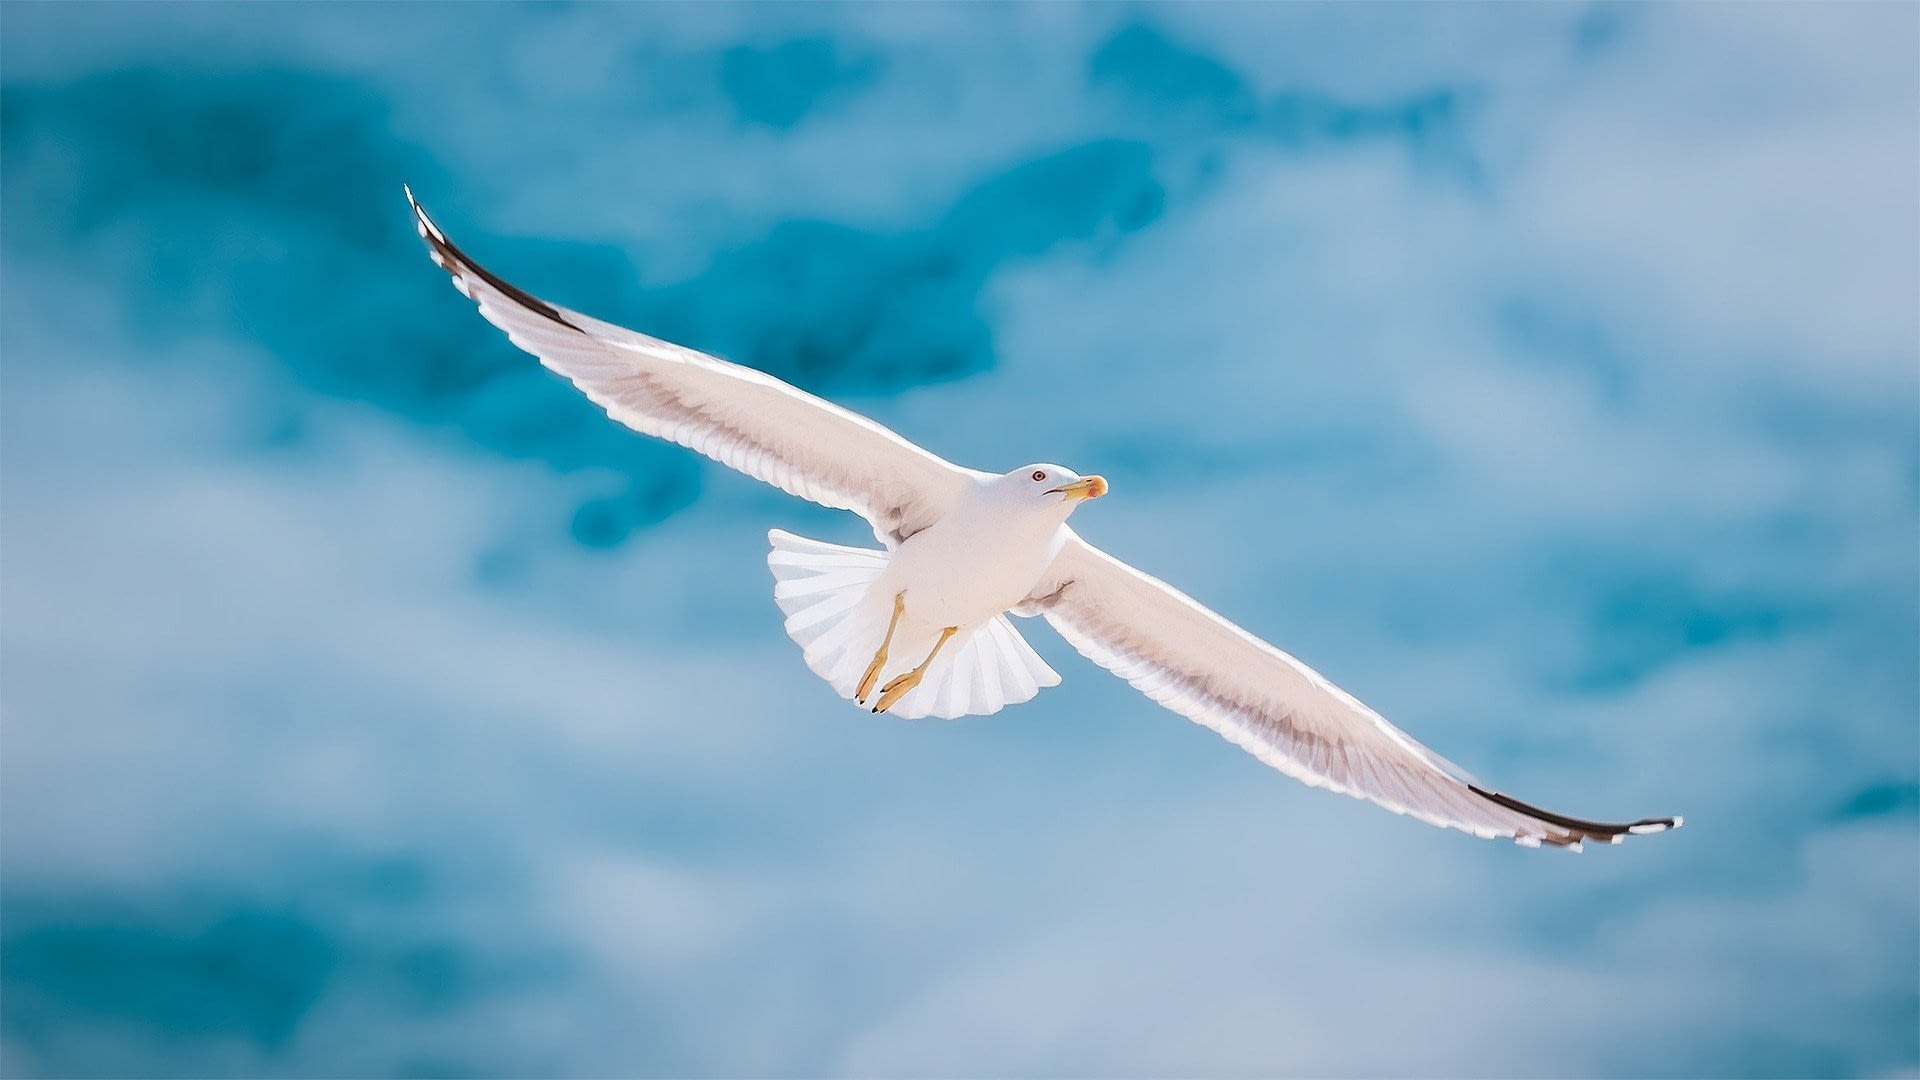 Image: Seagull flying with a blue sky in the background